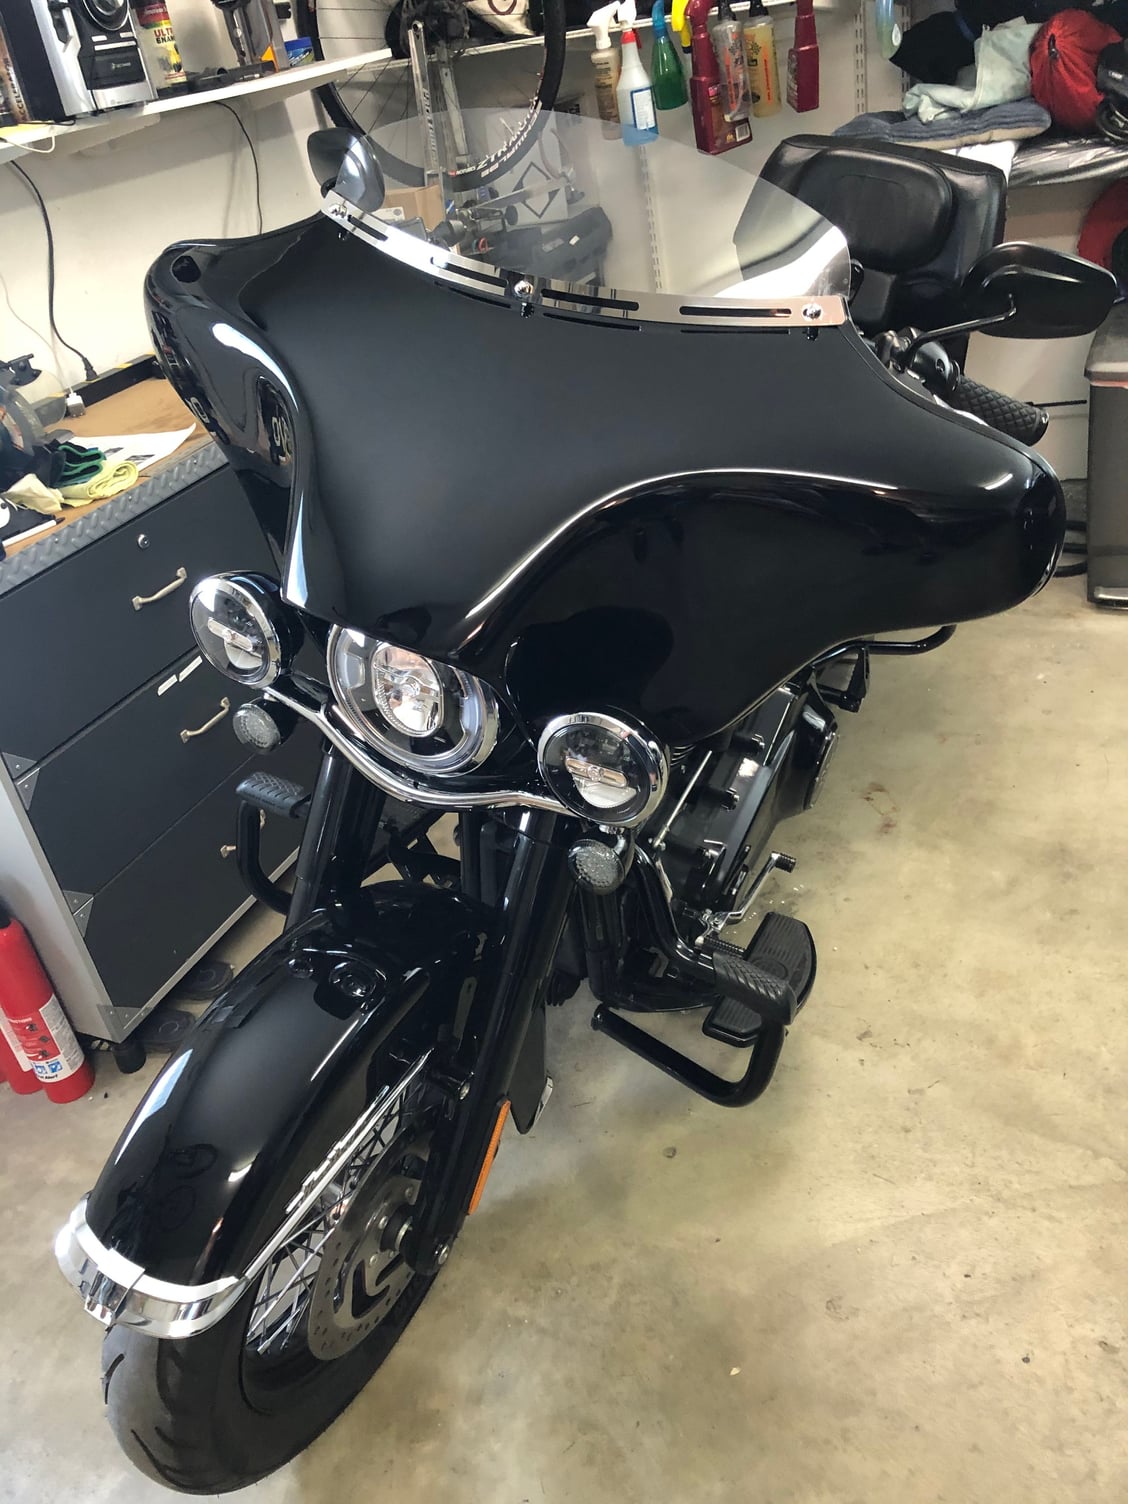 Reckless Motorcycle Fairing issue! - Harley Davidson Forums